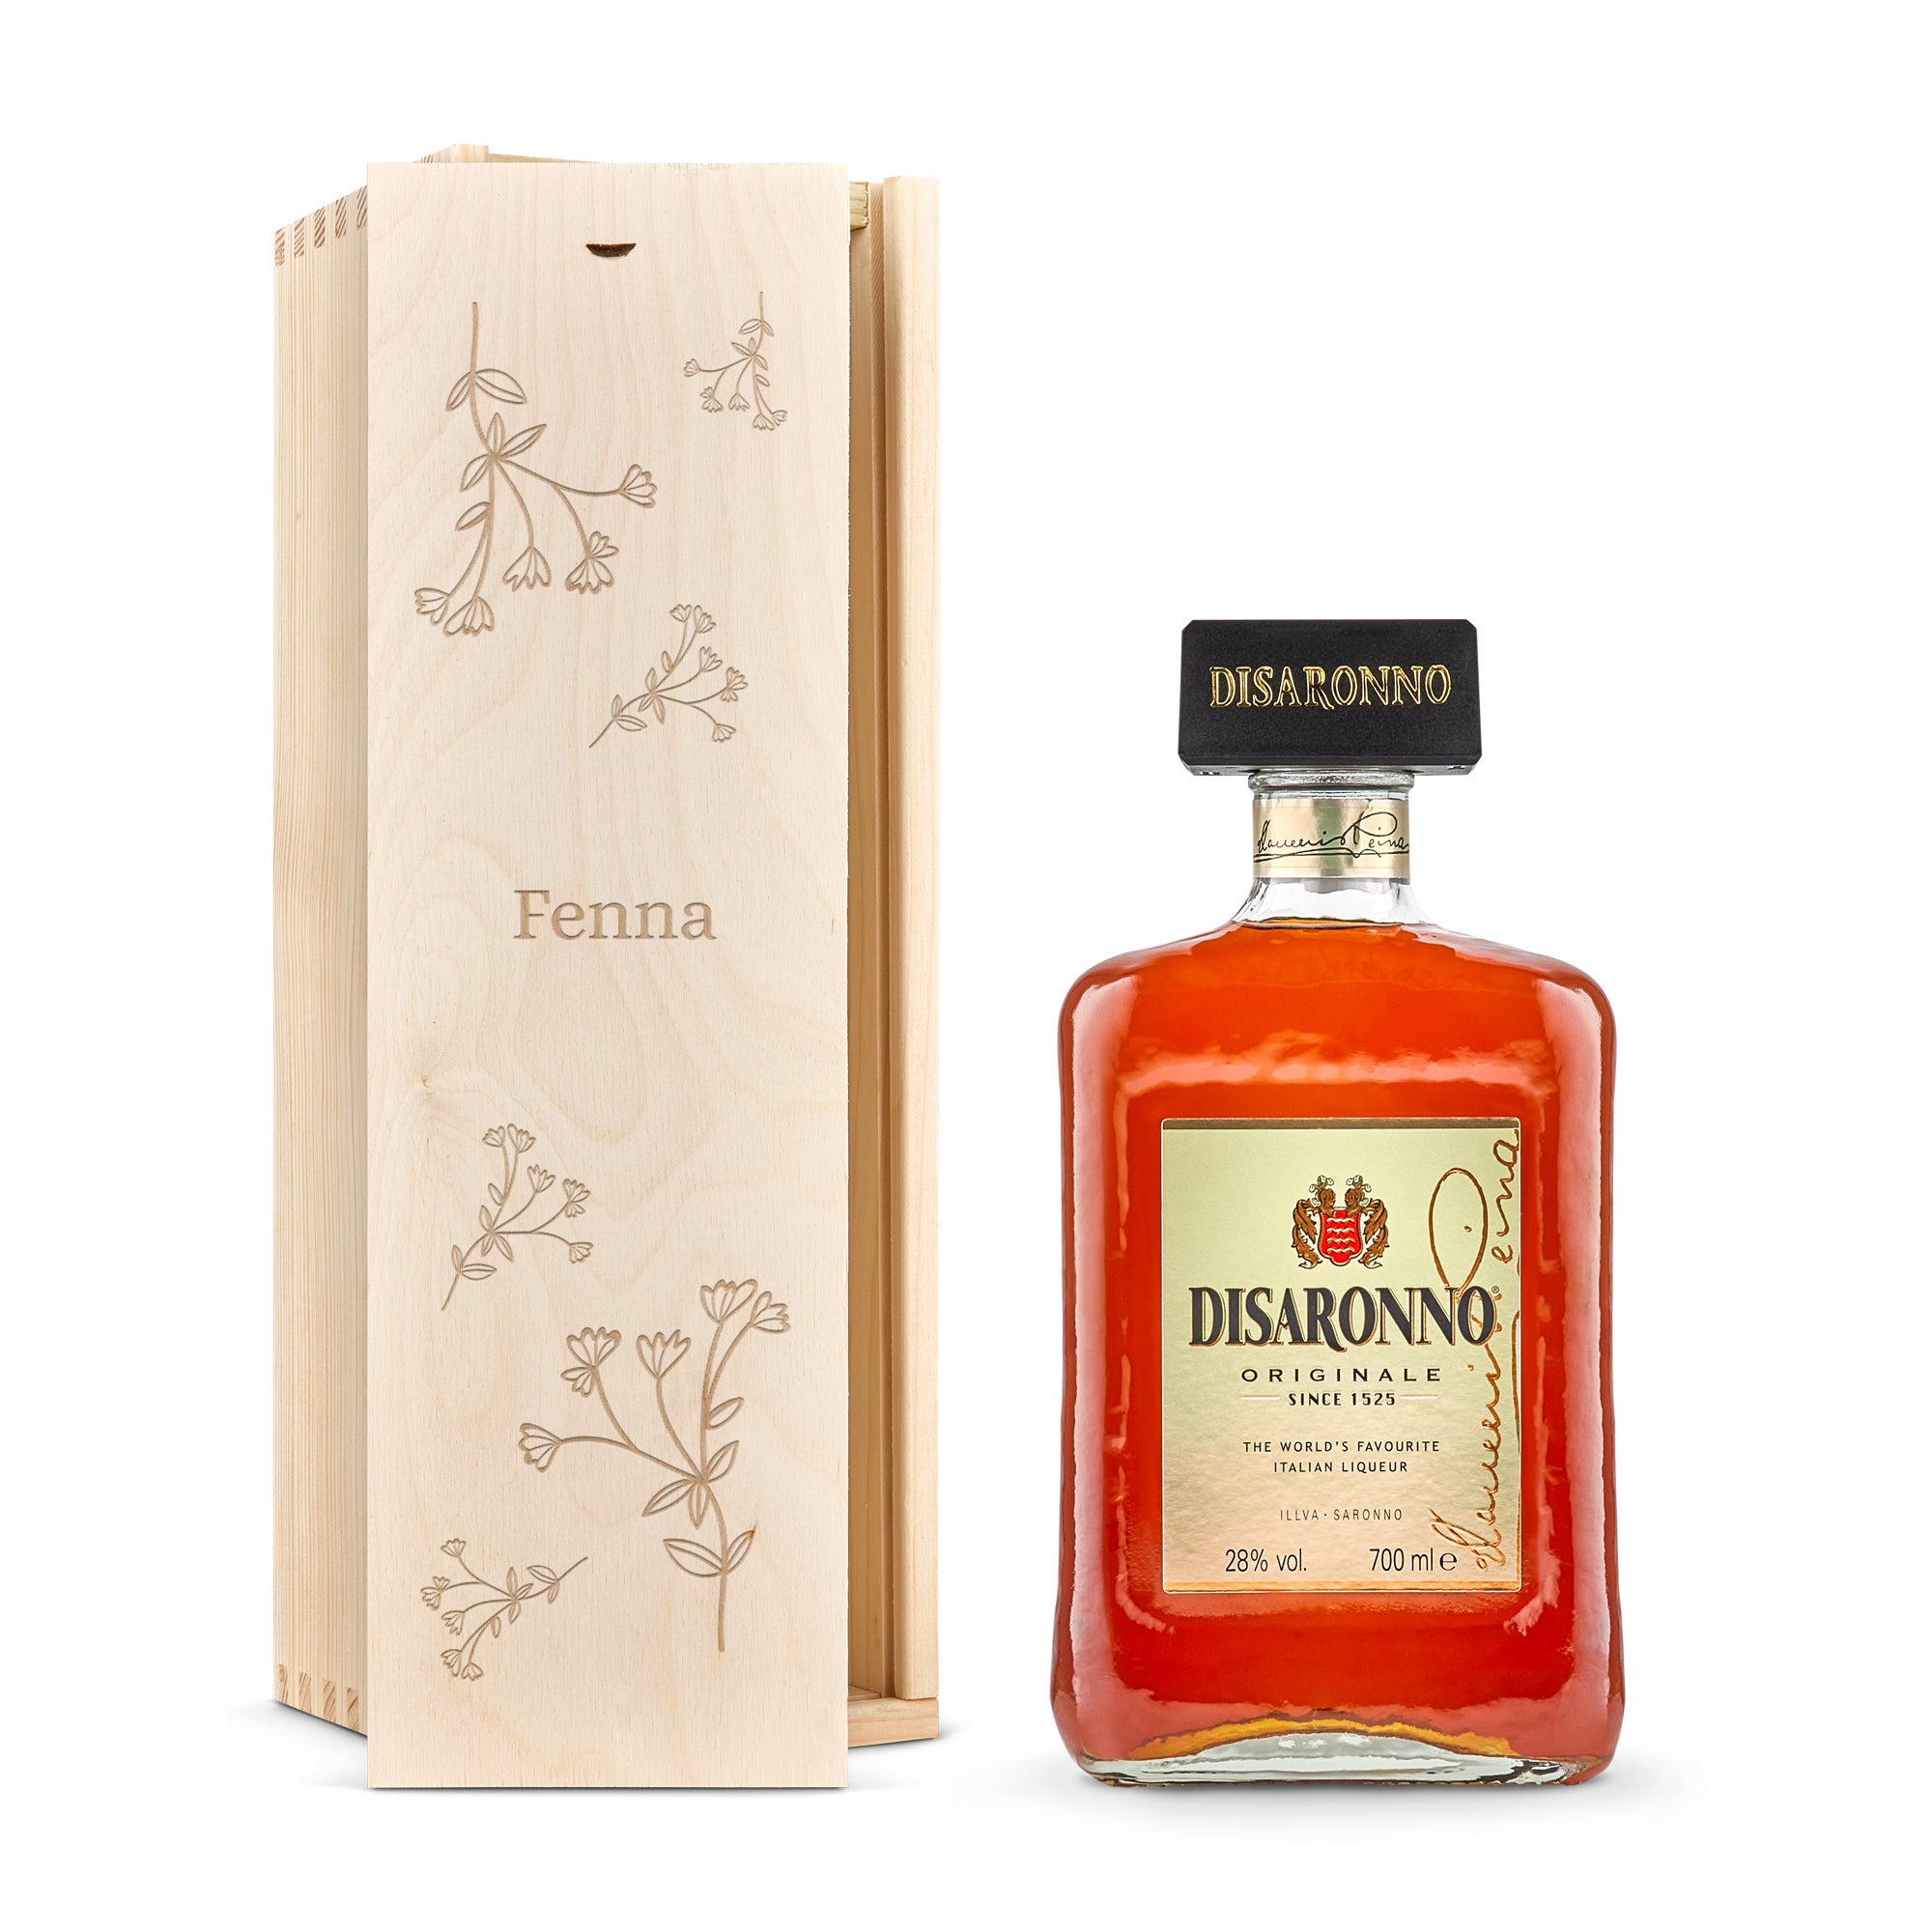 Personalised spirits - Amaretto Disaronno - Engraved wooden case